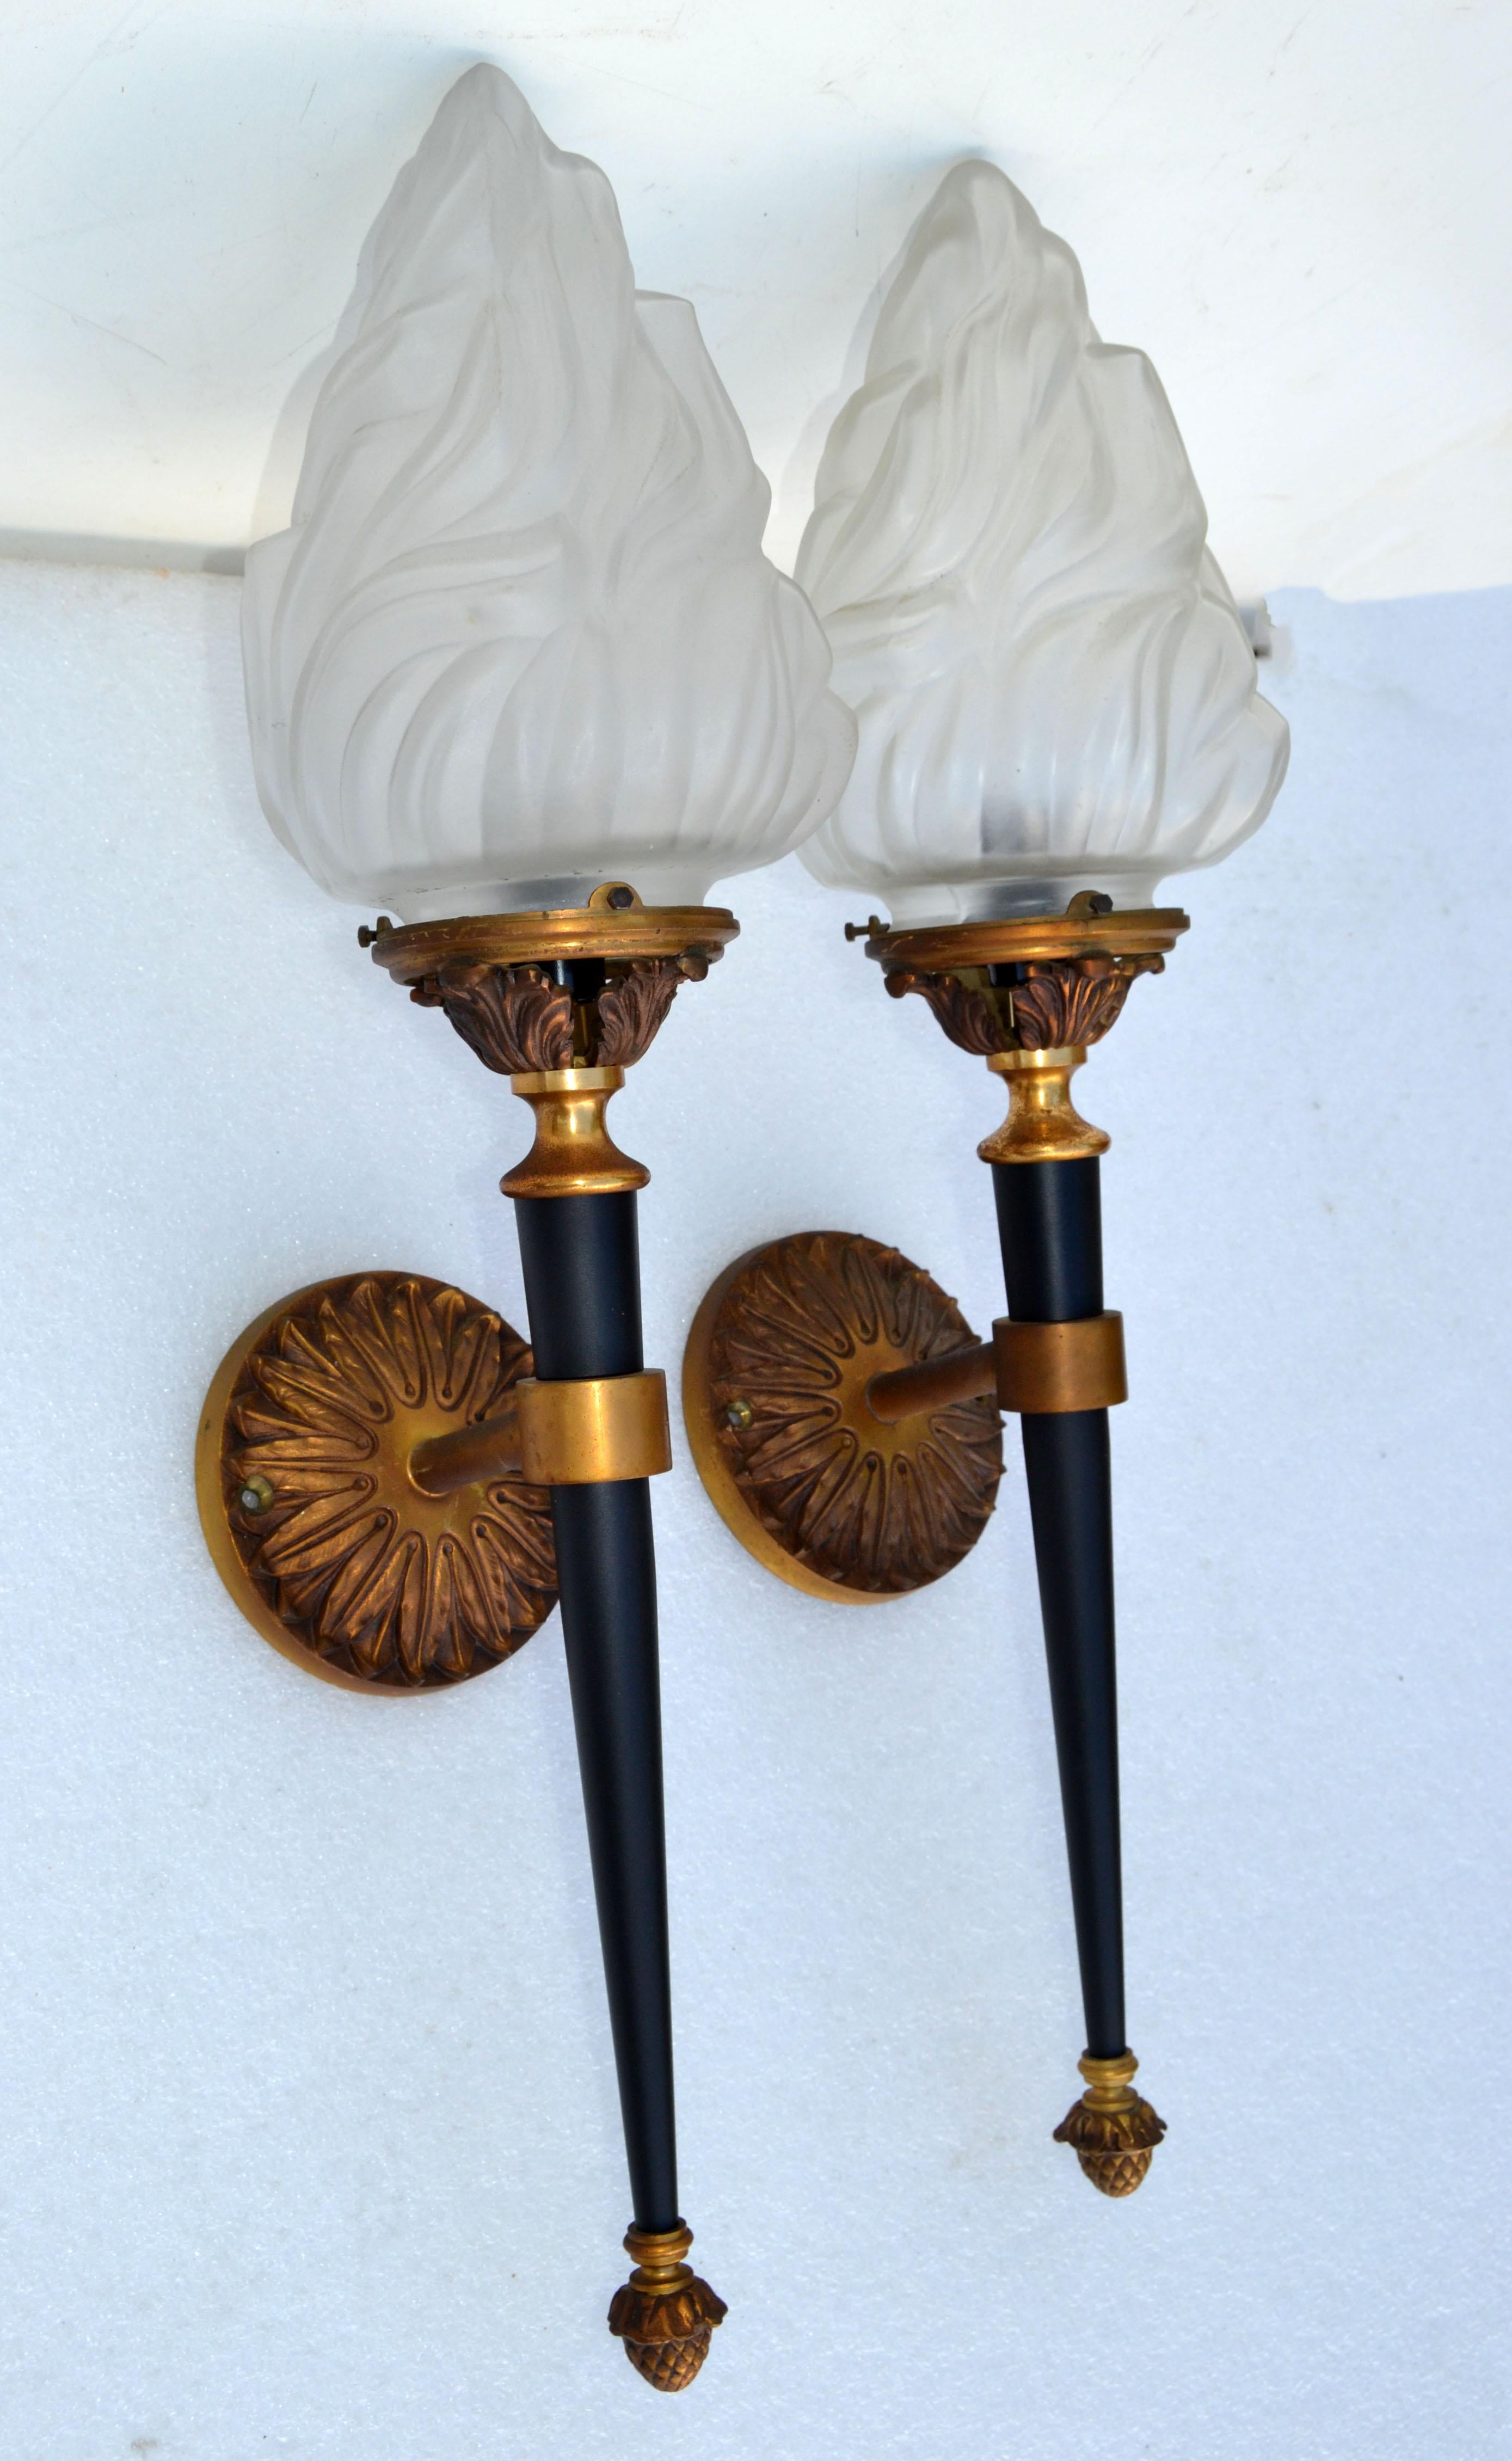 Neoclassical Maison Jansen Sconces Solid Bronze & Blown Glass Flame Shade France 1950, Pair For Sale